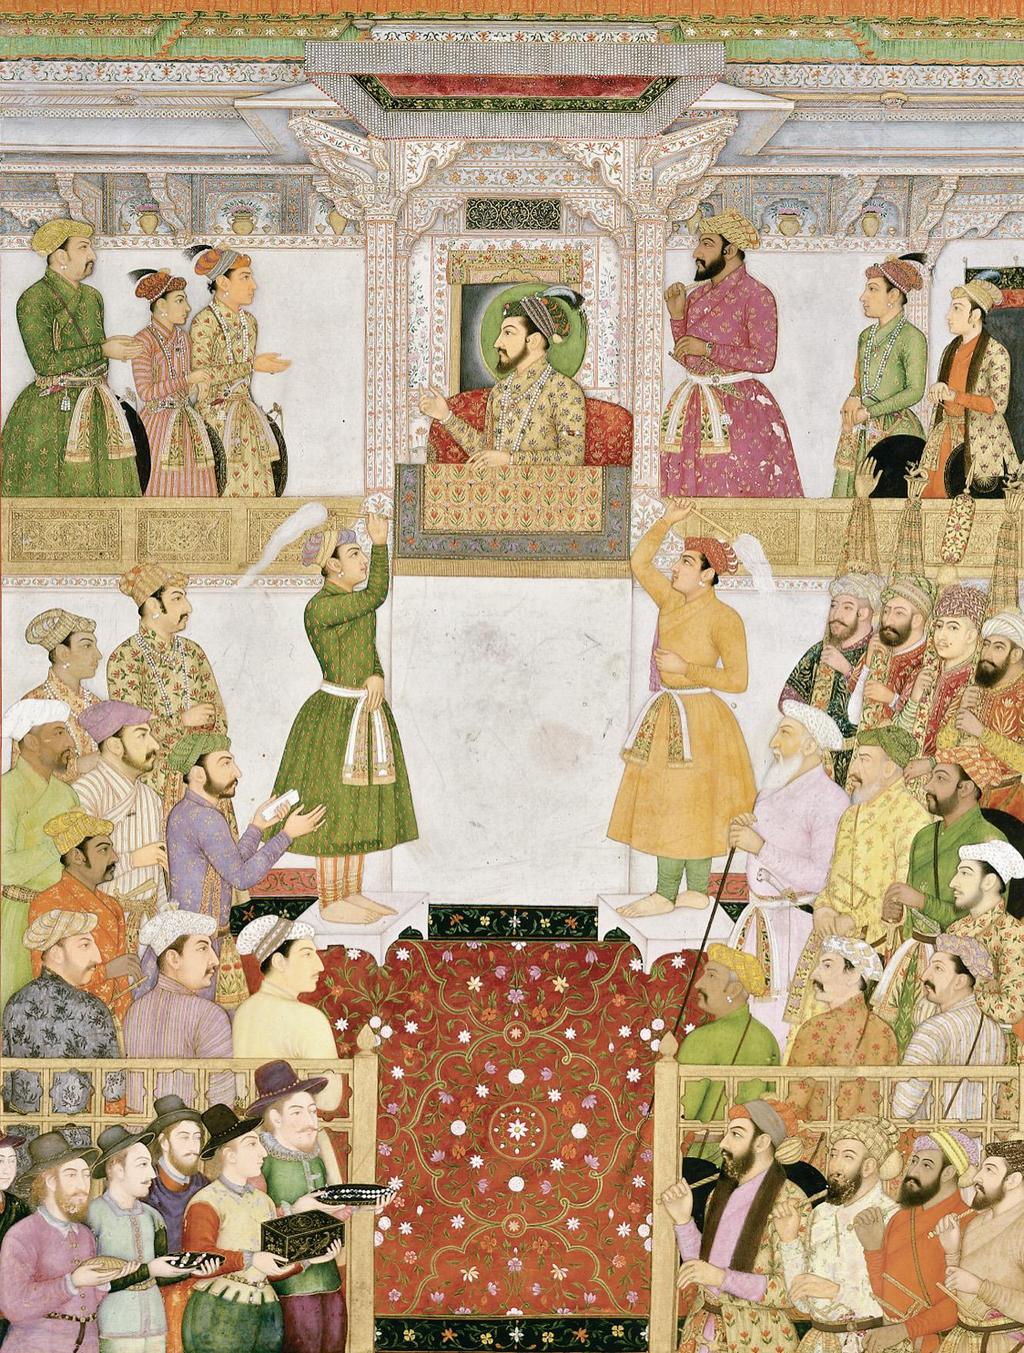 Visualizing the Past Art as a Window into the Past: Paintings and History in Mughal India